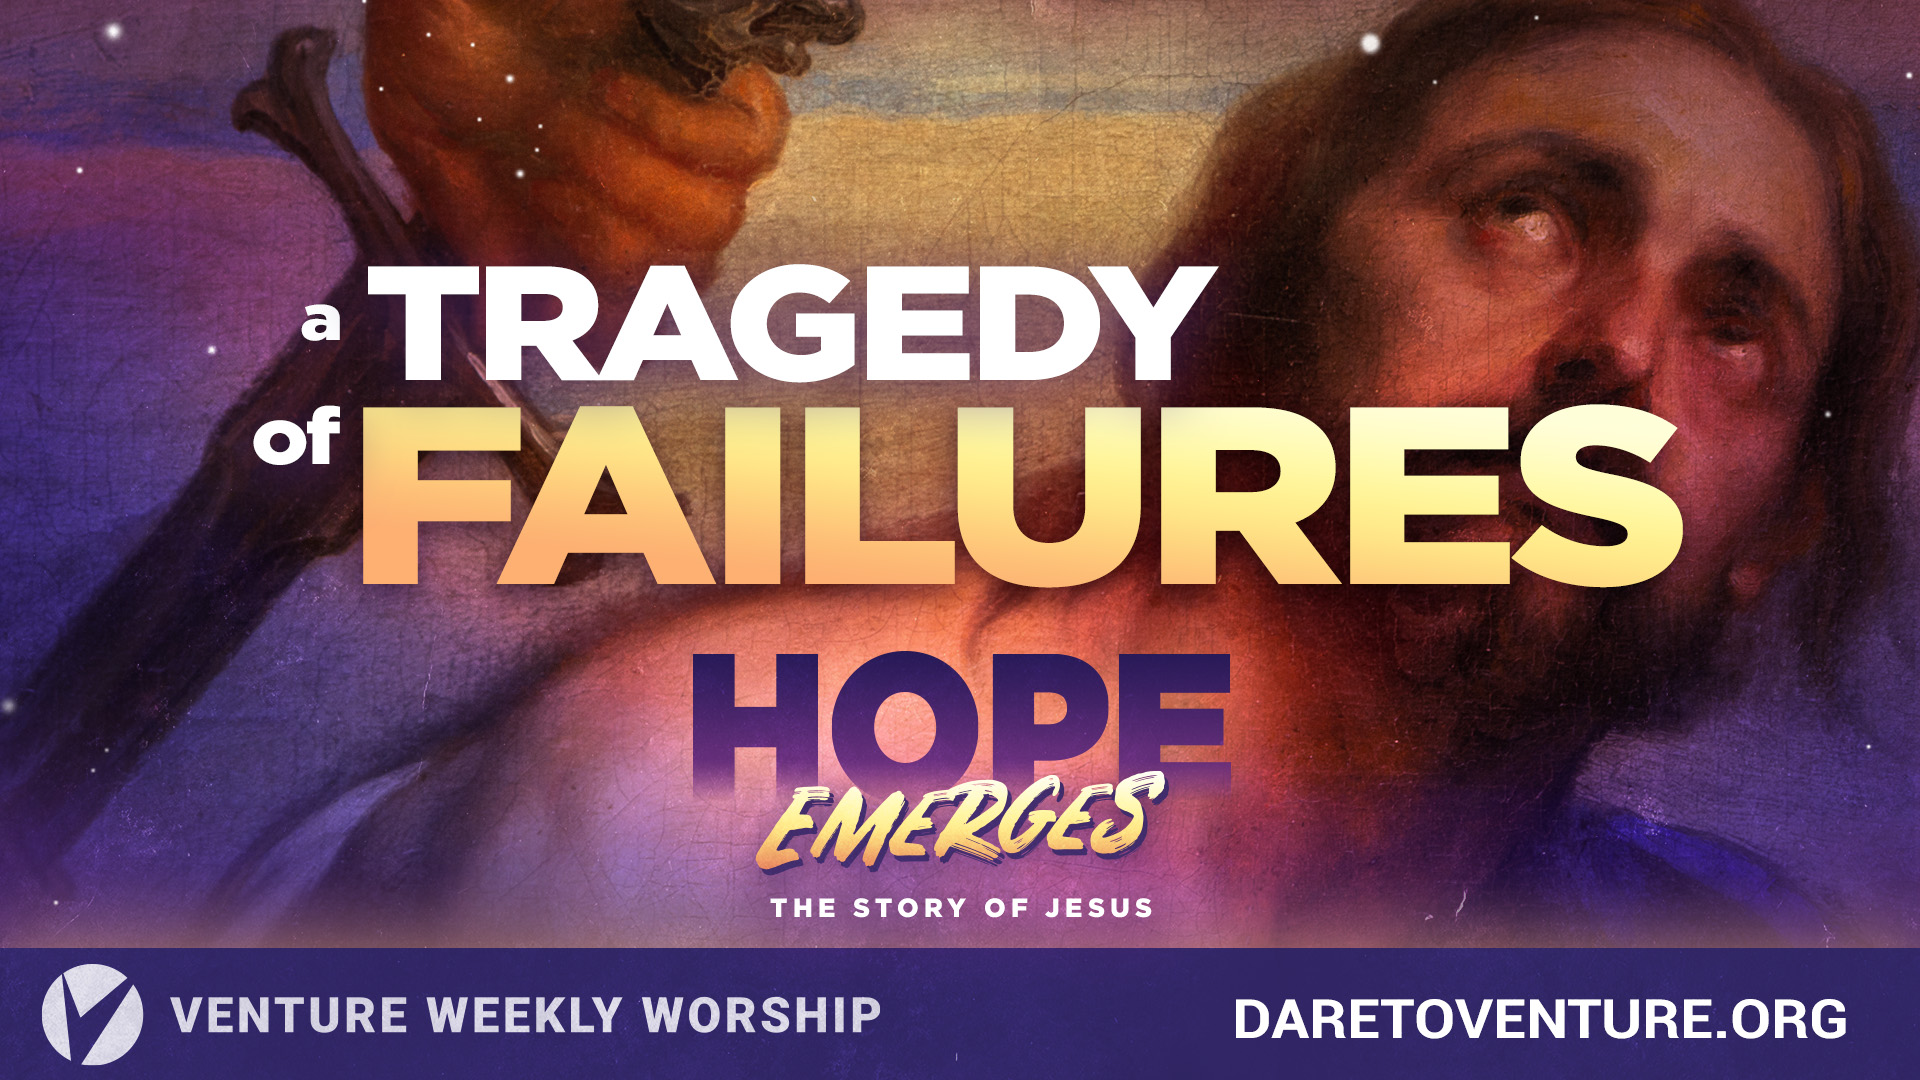 Hope Emerges: A Tragedy of Failures